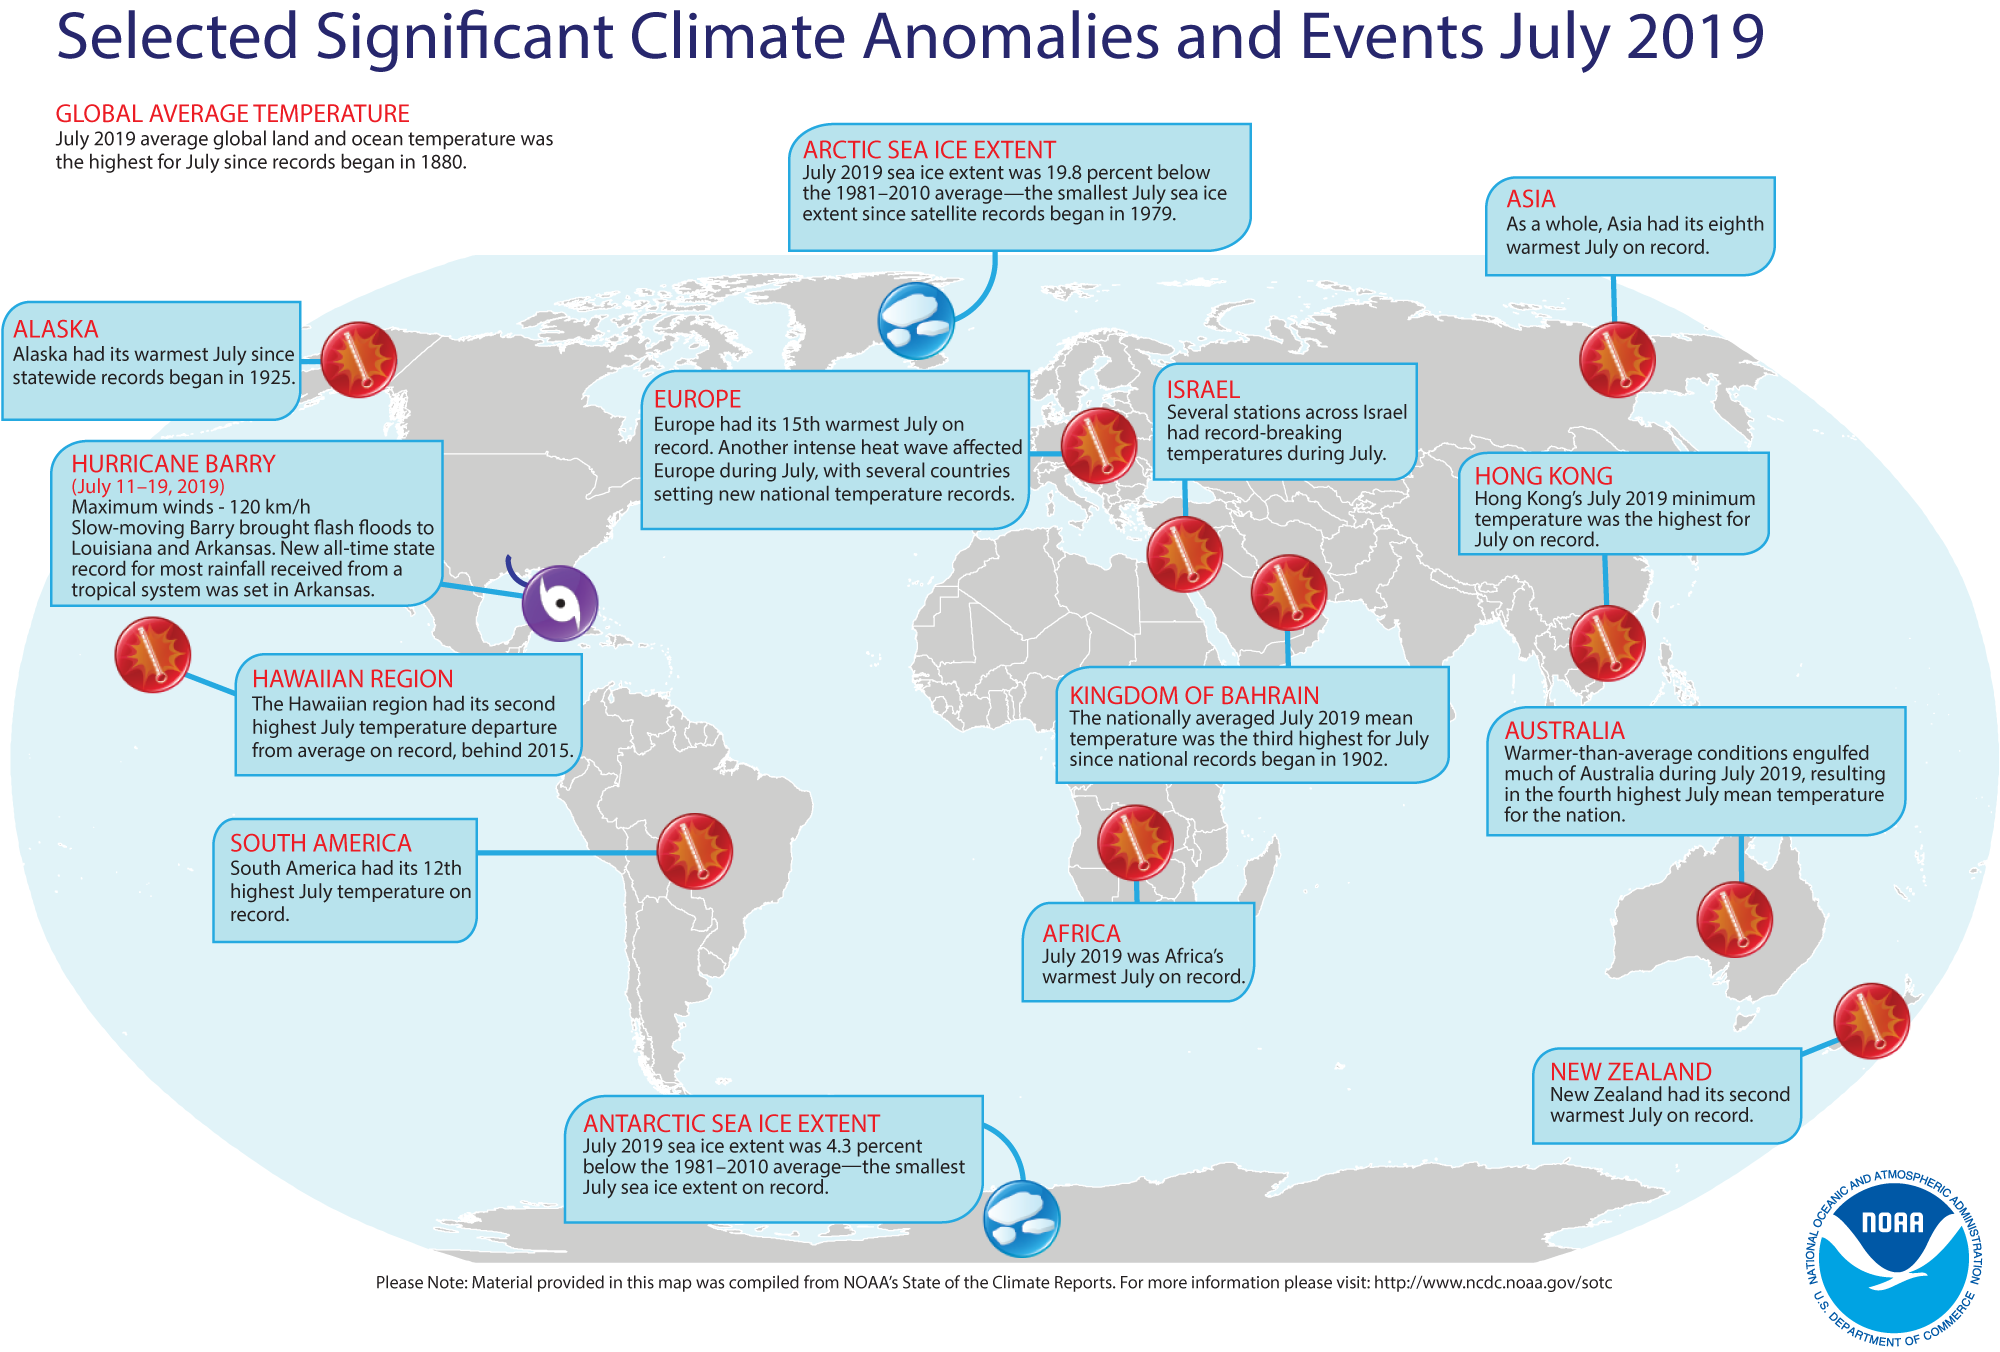 An annotated map of the world showing notable climate events that occurred around the world in July 2019. For details, see the short bulleted list below in our story